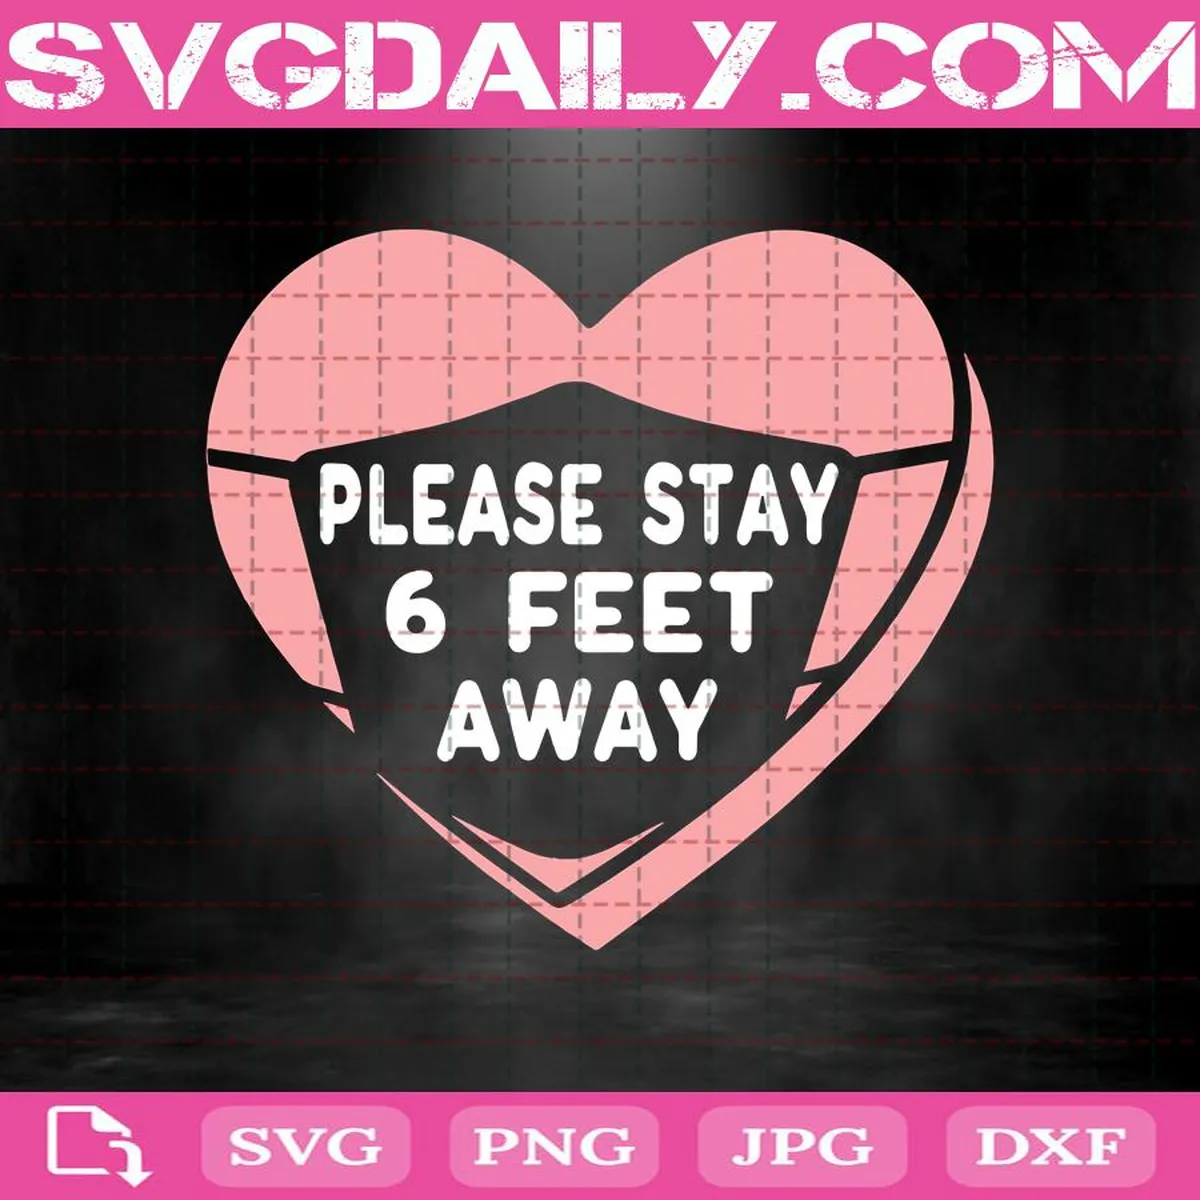 Please Stay 6 Feet Away Svg, Valentine's Day Svg, Heart Svg, Valentine Svg, Valentine Gift Svg, Svg Png Dxf Eps AI Instant Download